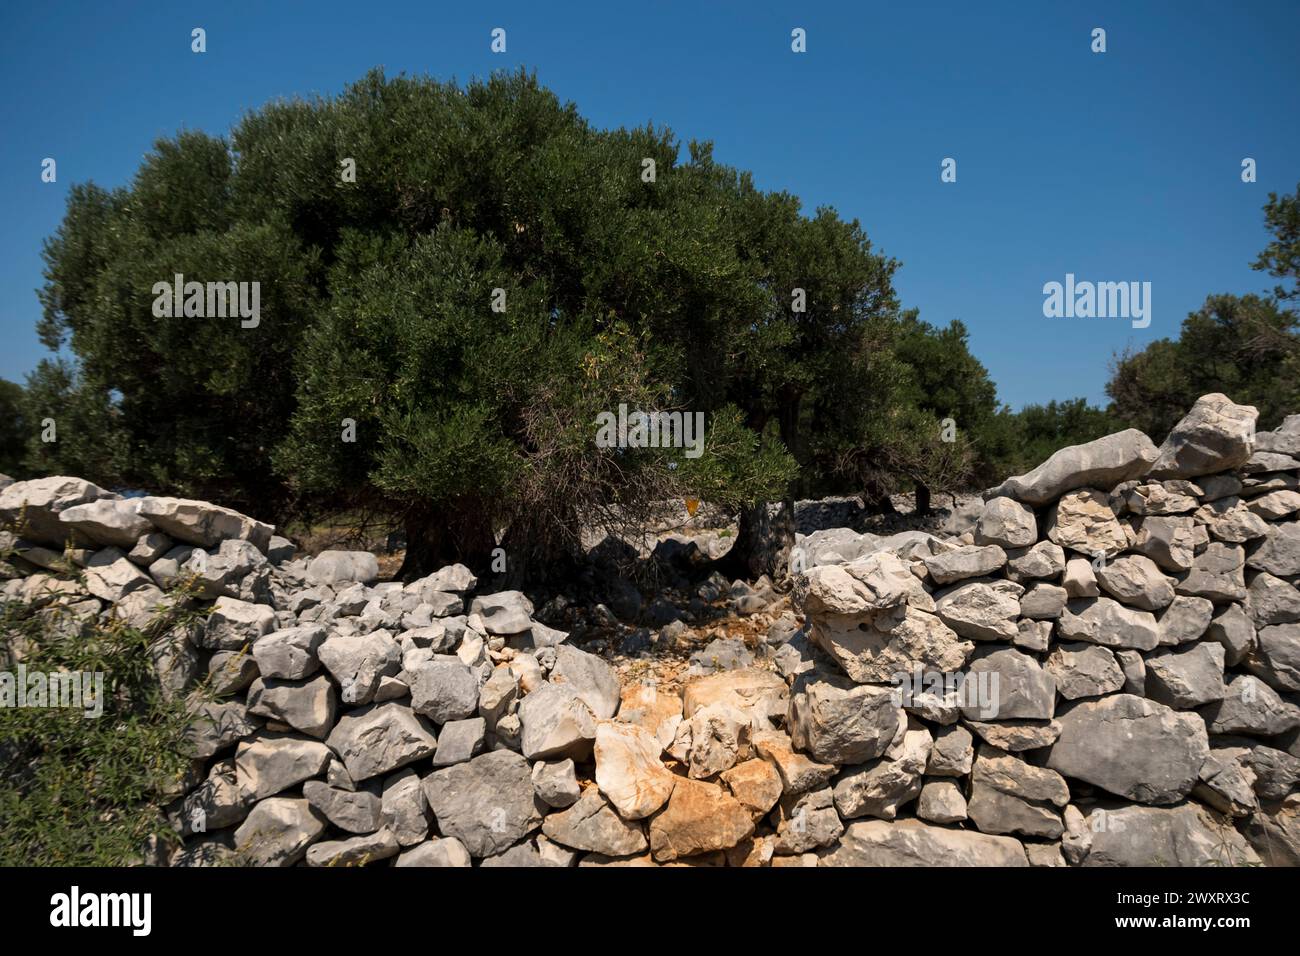 Single old olive tree behind an old wall made from limestone rocks Stock Photo